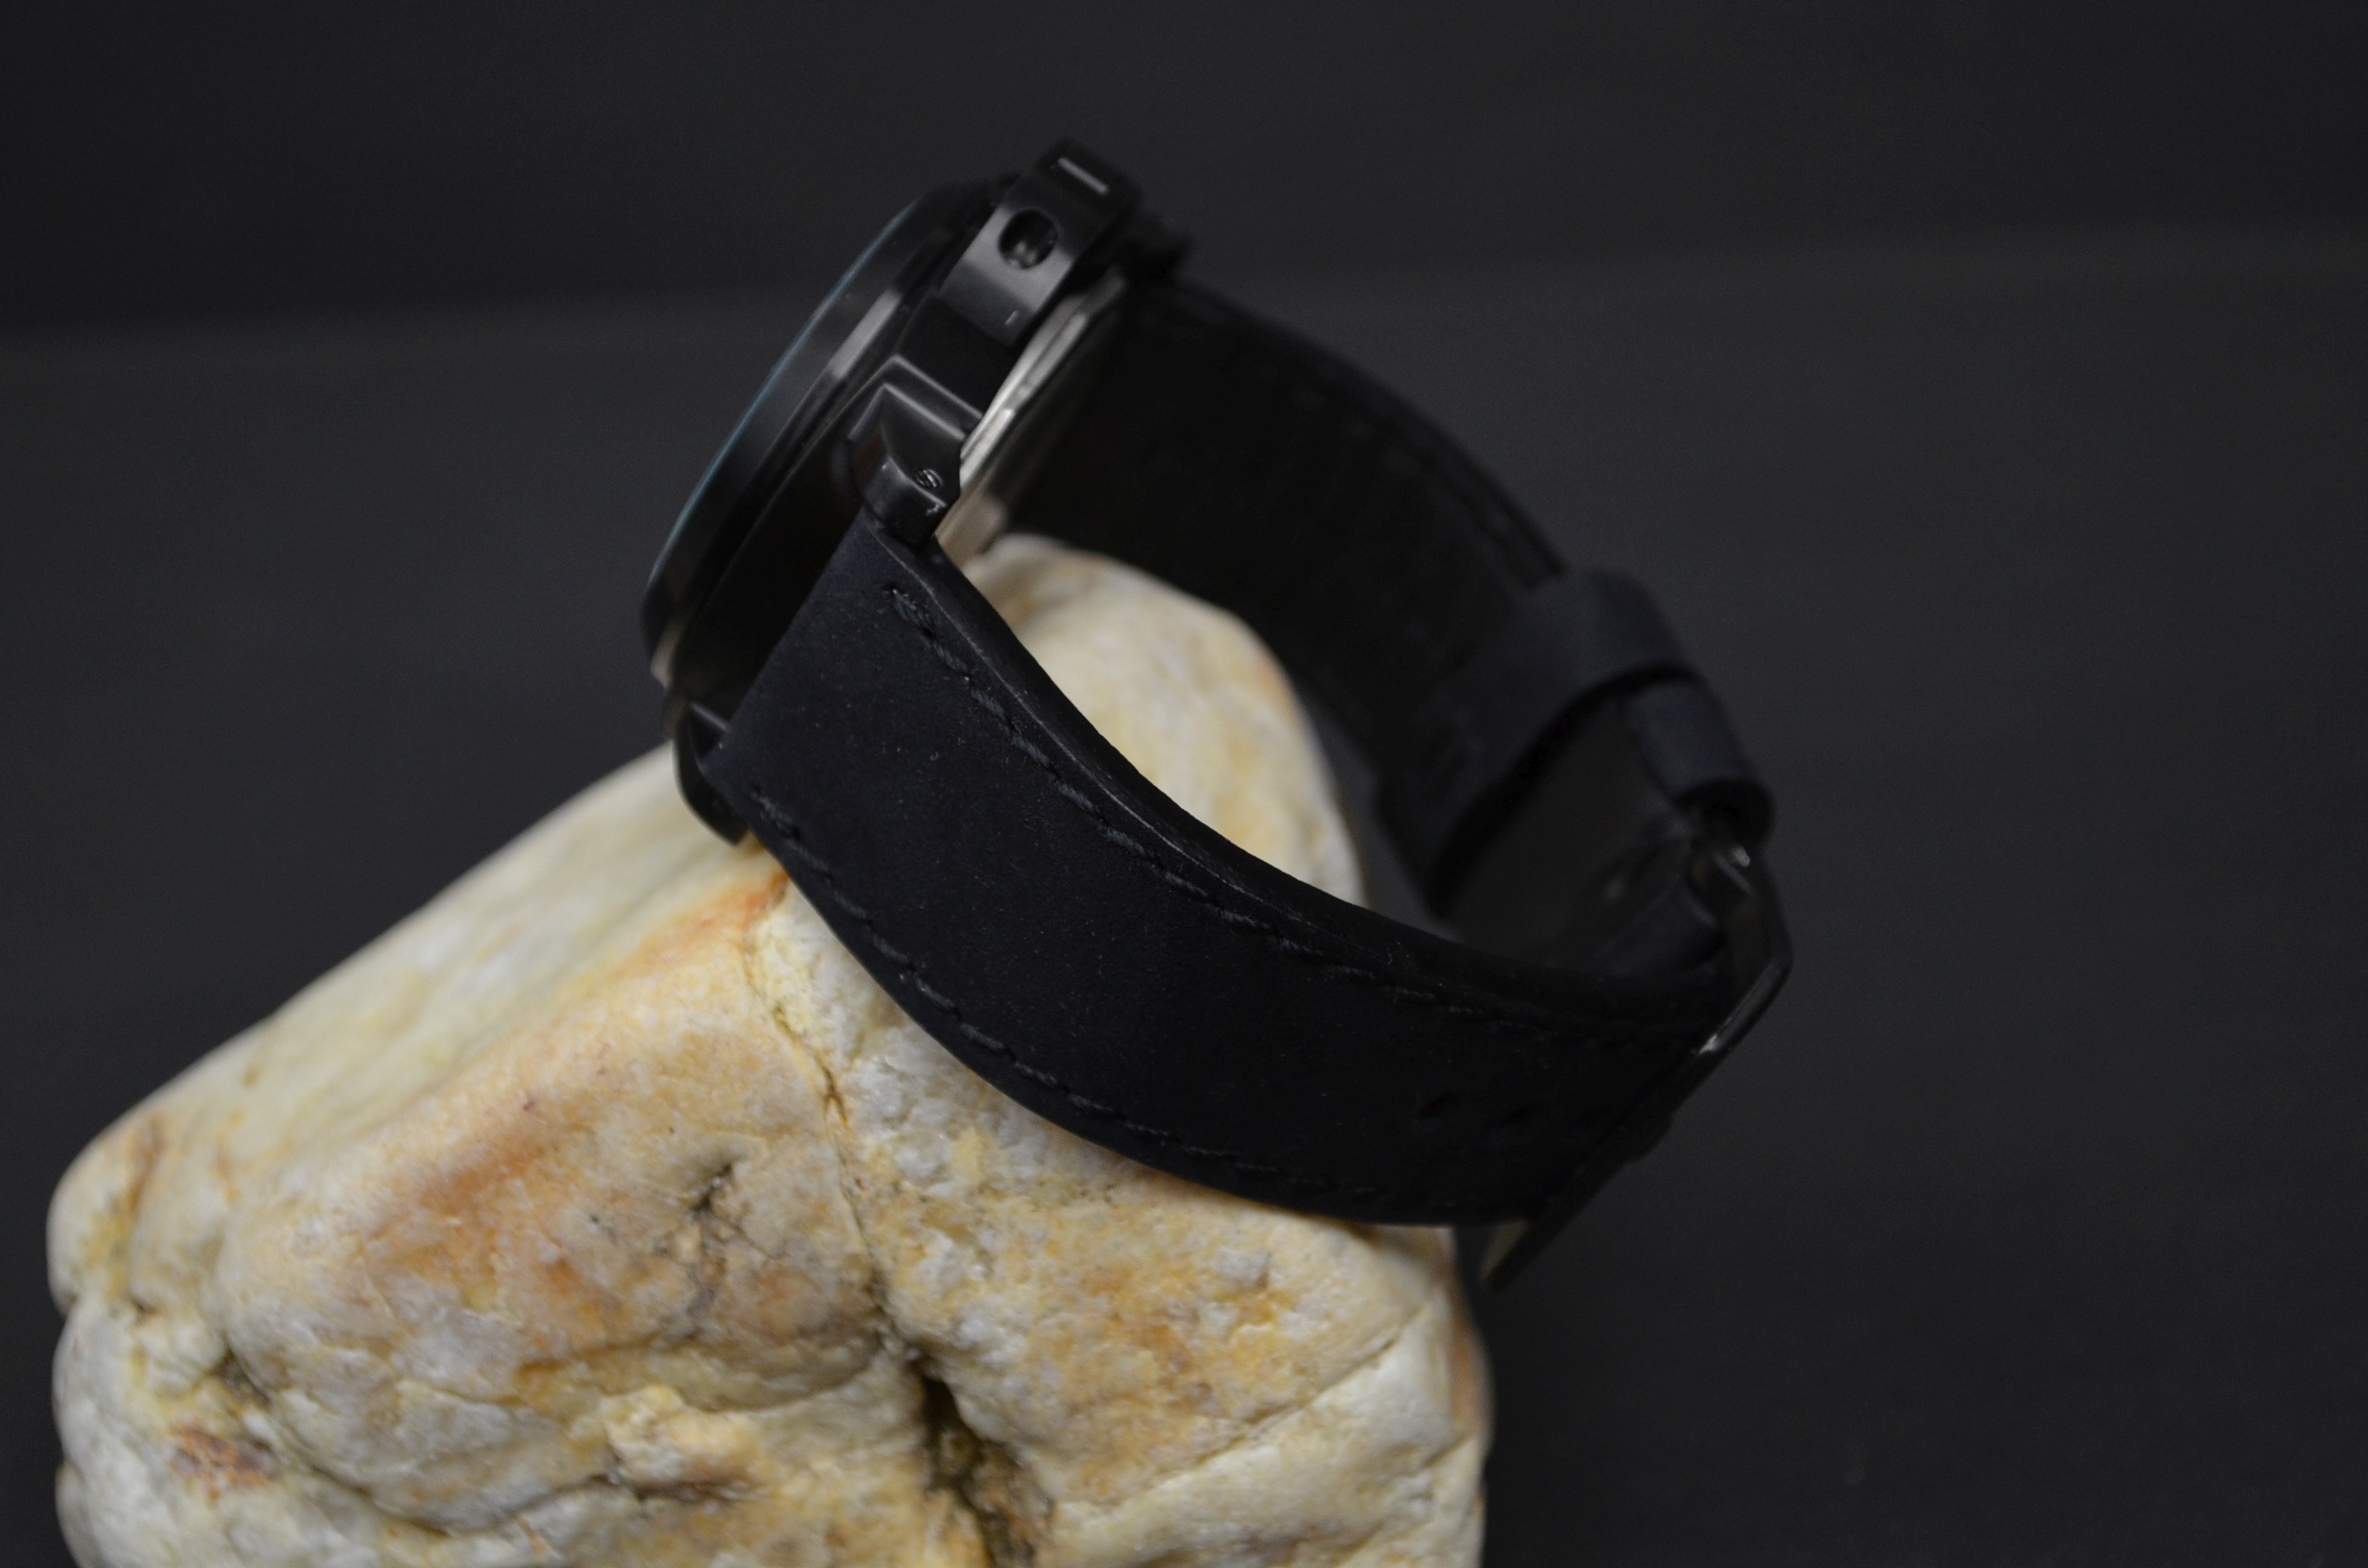 I BLACK is one of our hand crafted watch straps. Available in black color, 3.5 - 4 mm thick.